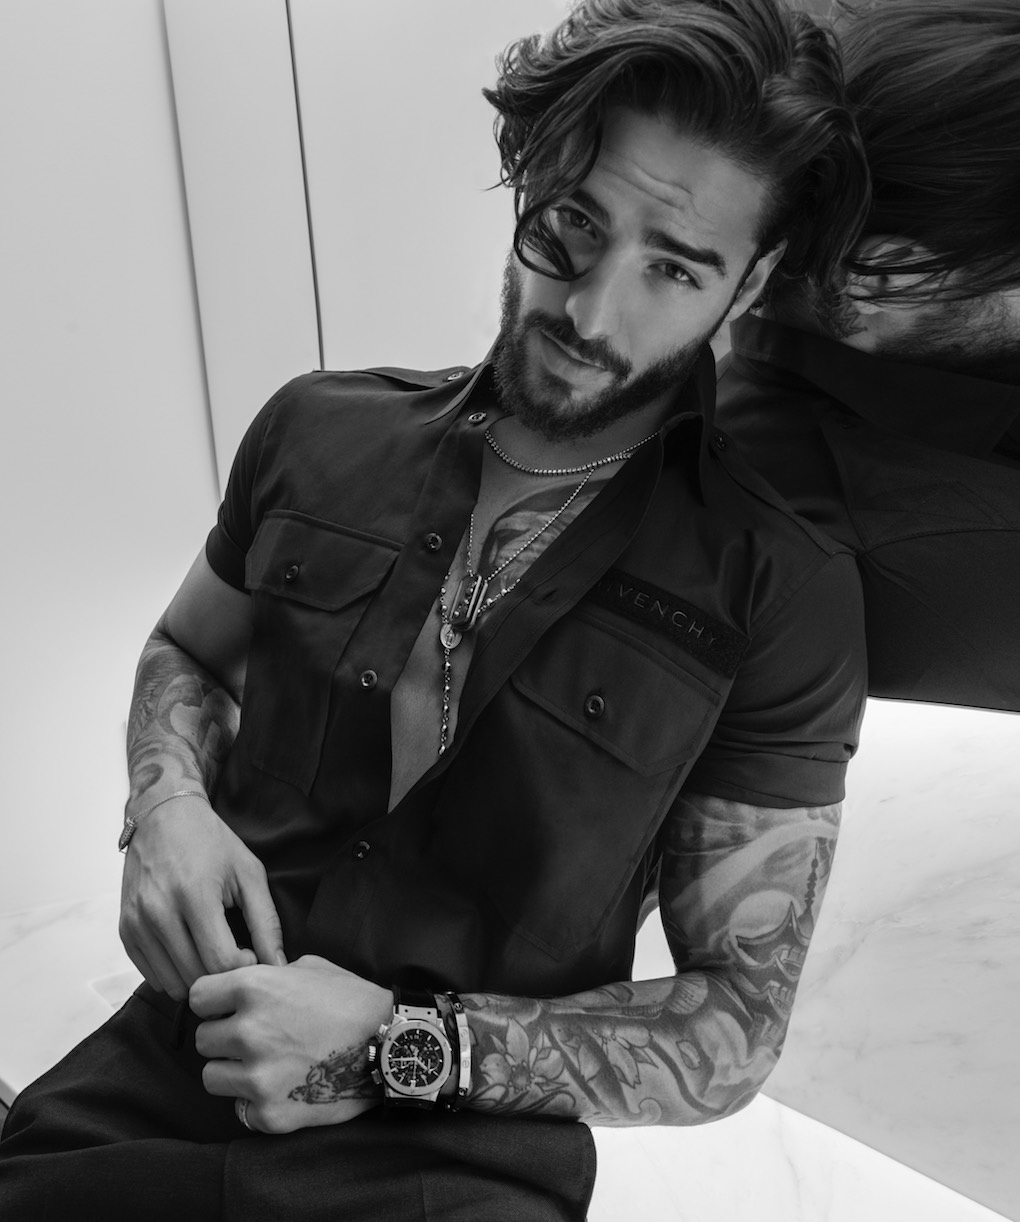 Maluma Attending Givenchy Photocall During Givenchy Editorial Stock Photo -  Stock Image